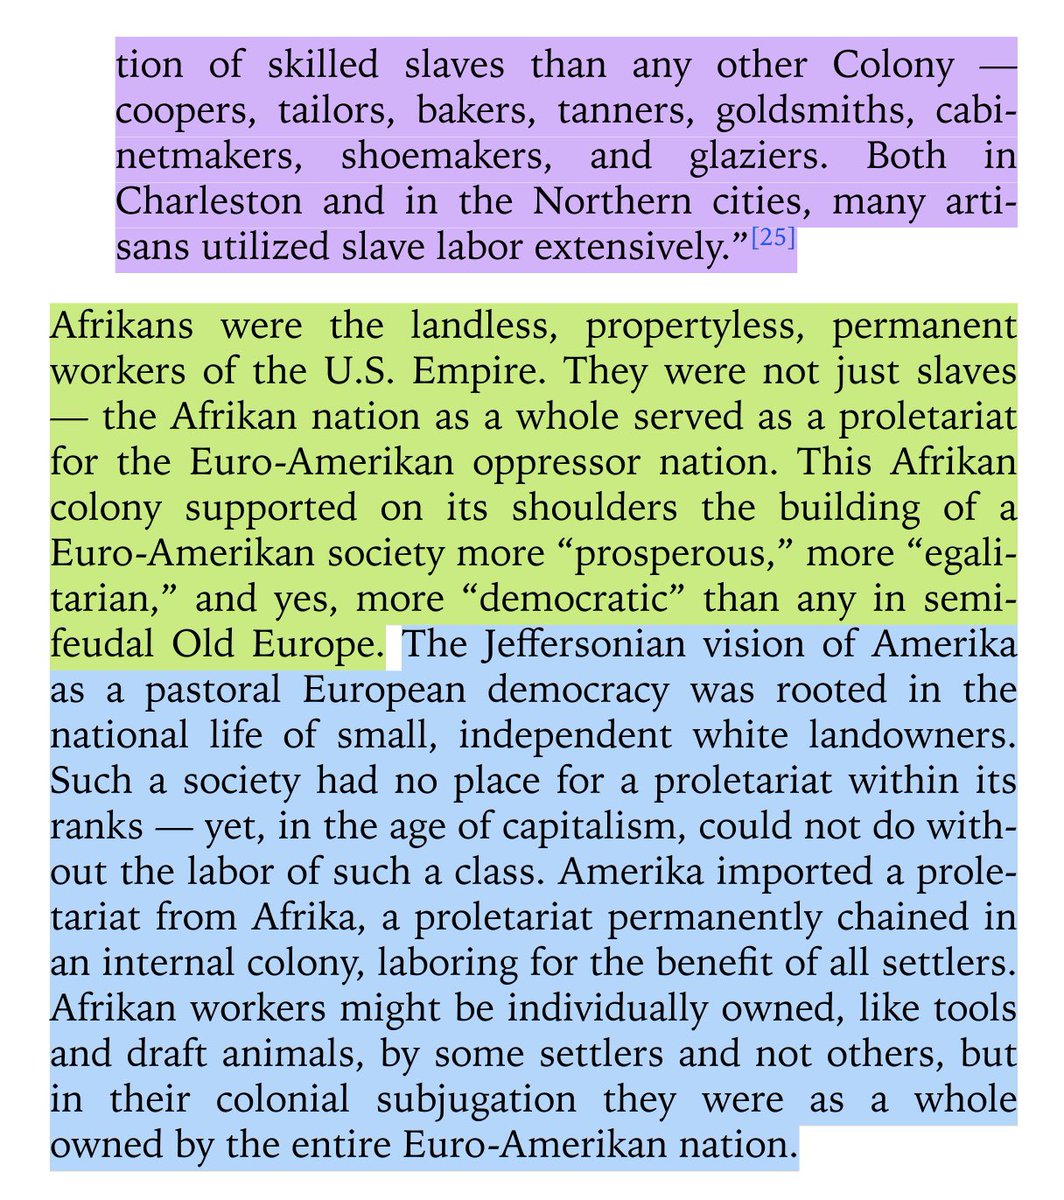 “afrikans were the landless, propertyless, permanent workers of the U.S. Empire. they were not just slaves — the afrikan nation as a whole served as a proletariat for the euro-amerikan oppressor nation.“—j. sakai,  http://readsettlers.org 